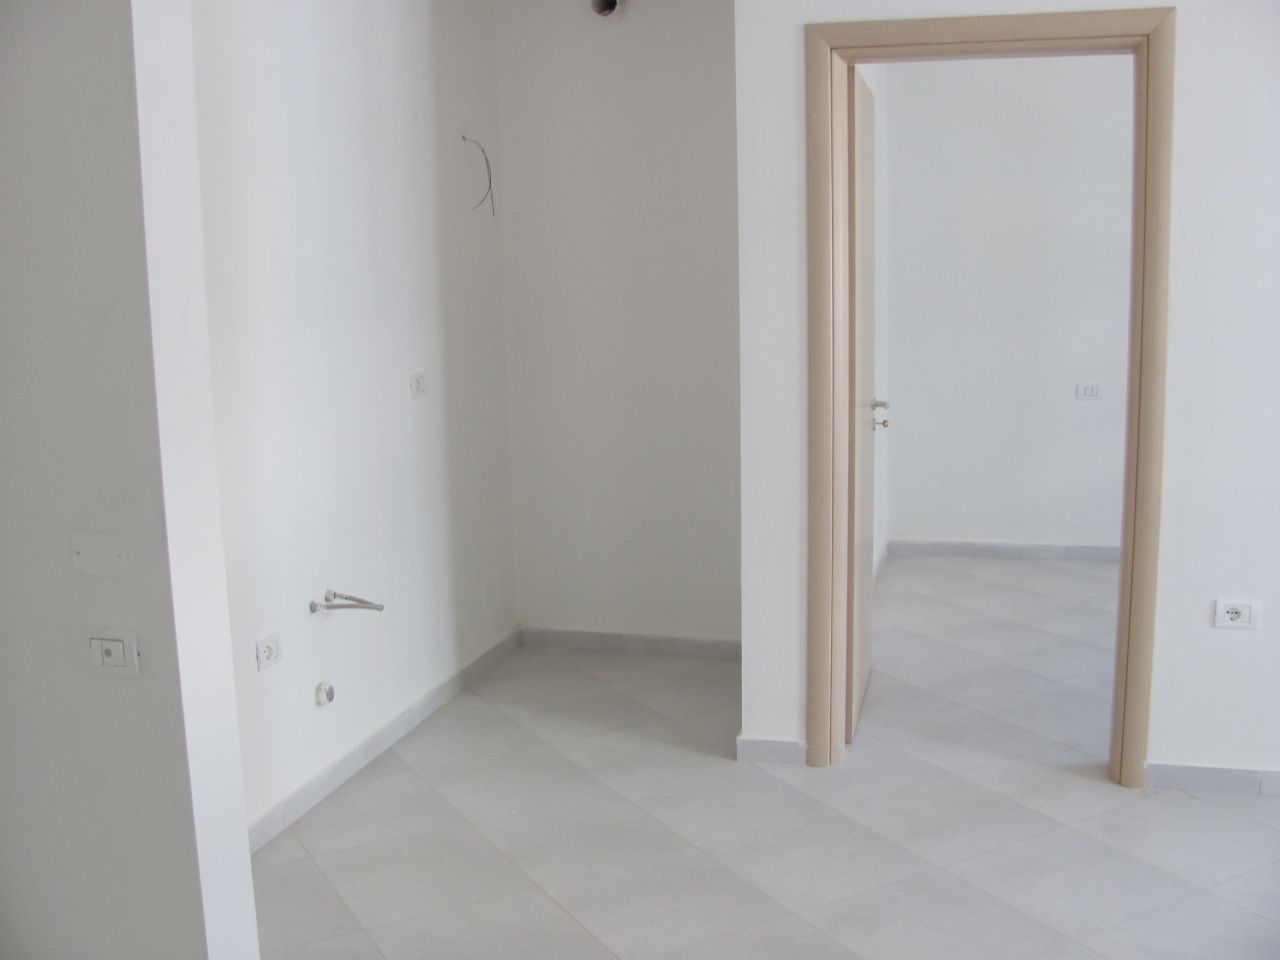 Finished apartments for sale in Vlore city very close to the sea 